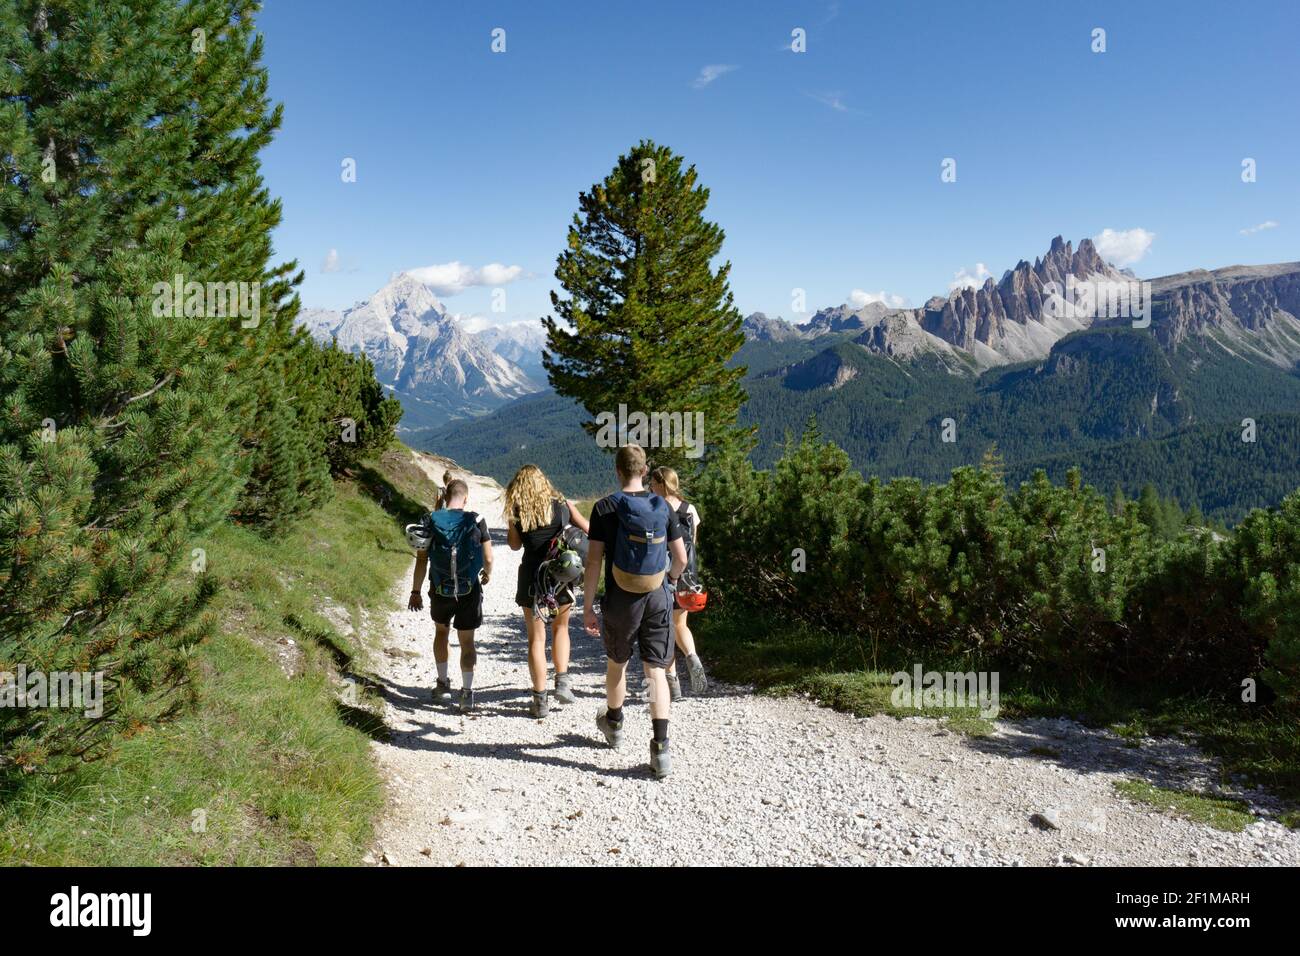 Climbers walking down a road in a Dolomite mountain landscape after a hard climb Stock Photo